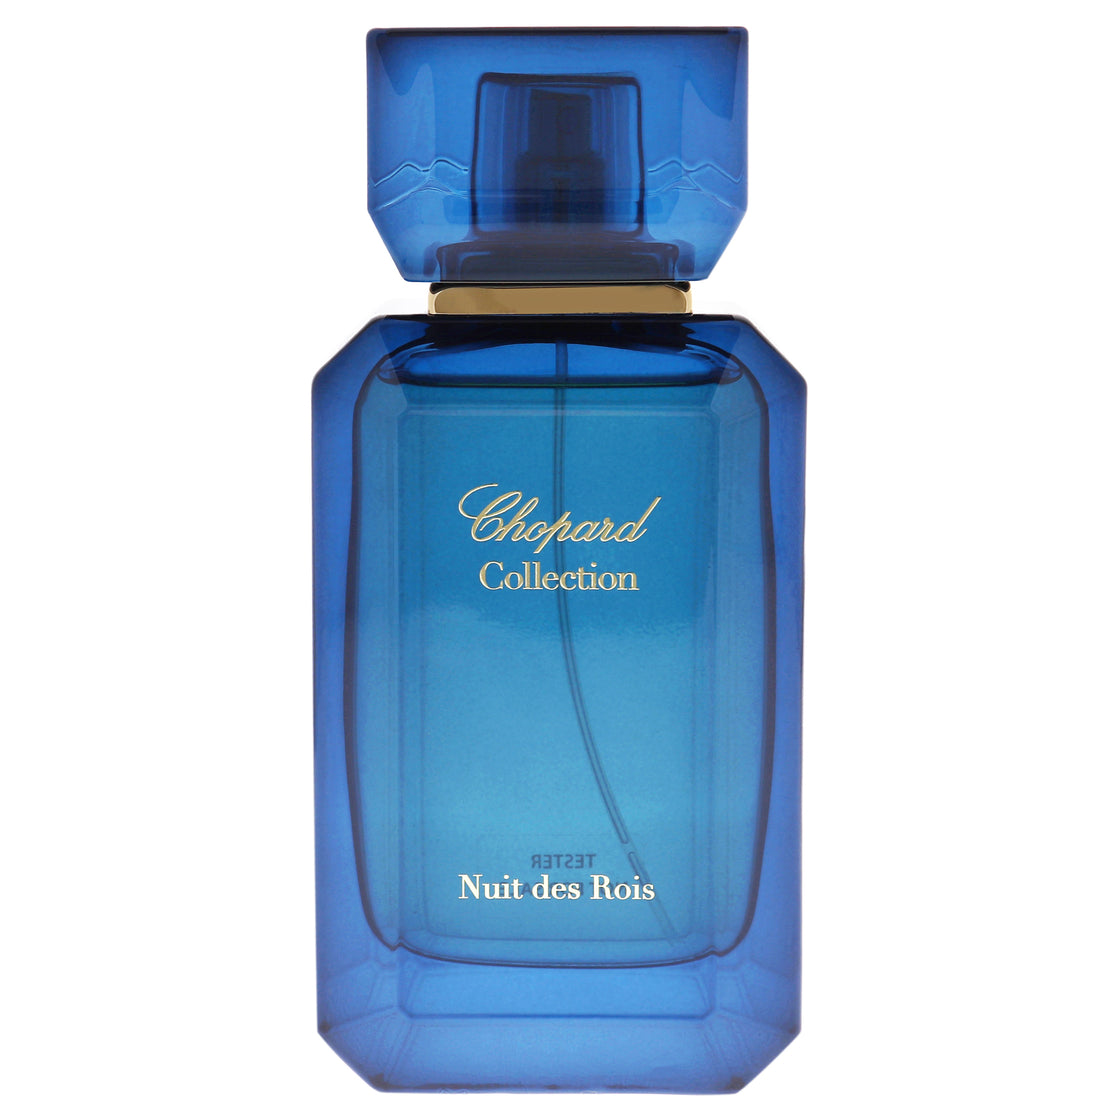 Nuit des Rois by Chopard for Women - 3.3 oz EDP Spray (Tester)